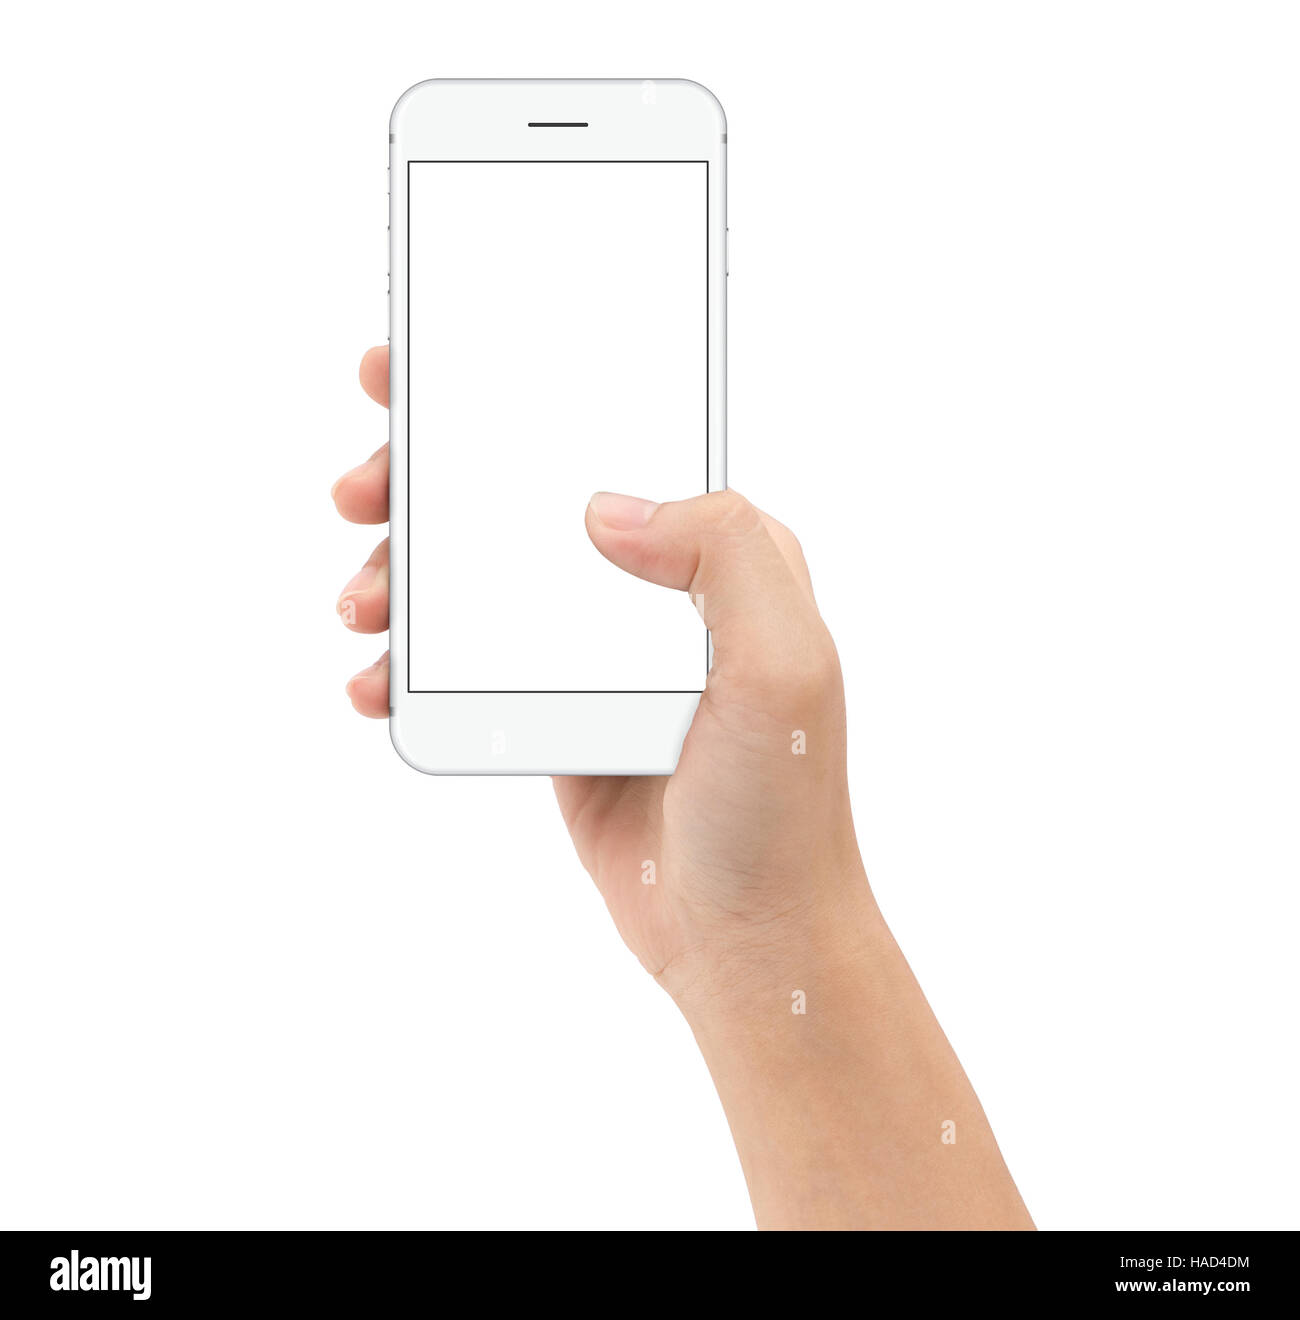 hand holding smart phone on white background clipphing path inside, mock-up phone white screen Stock Photo